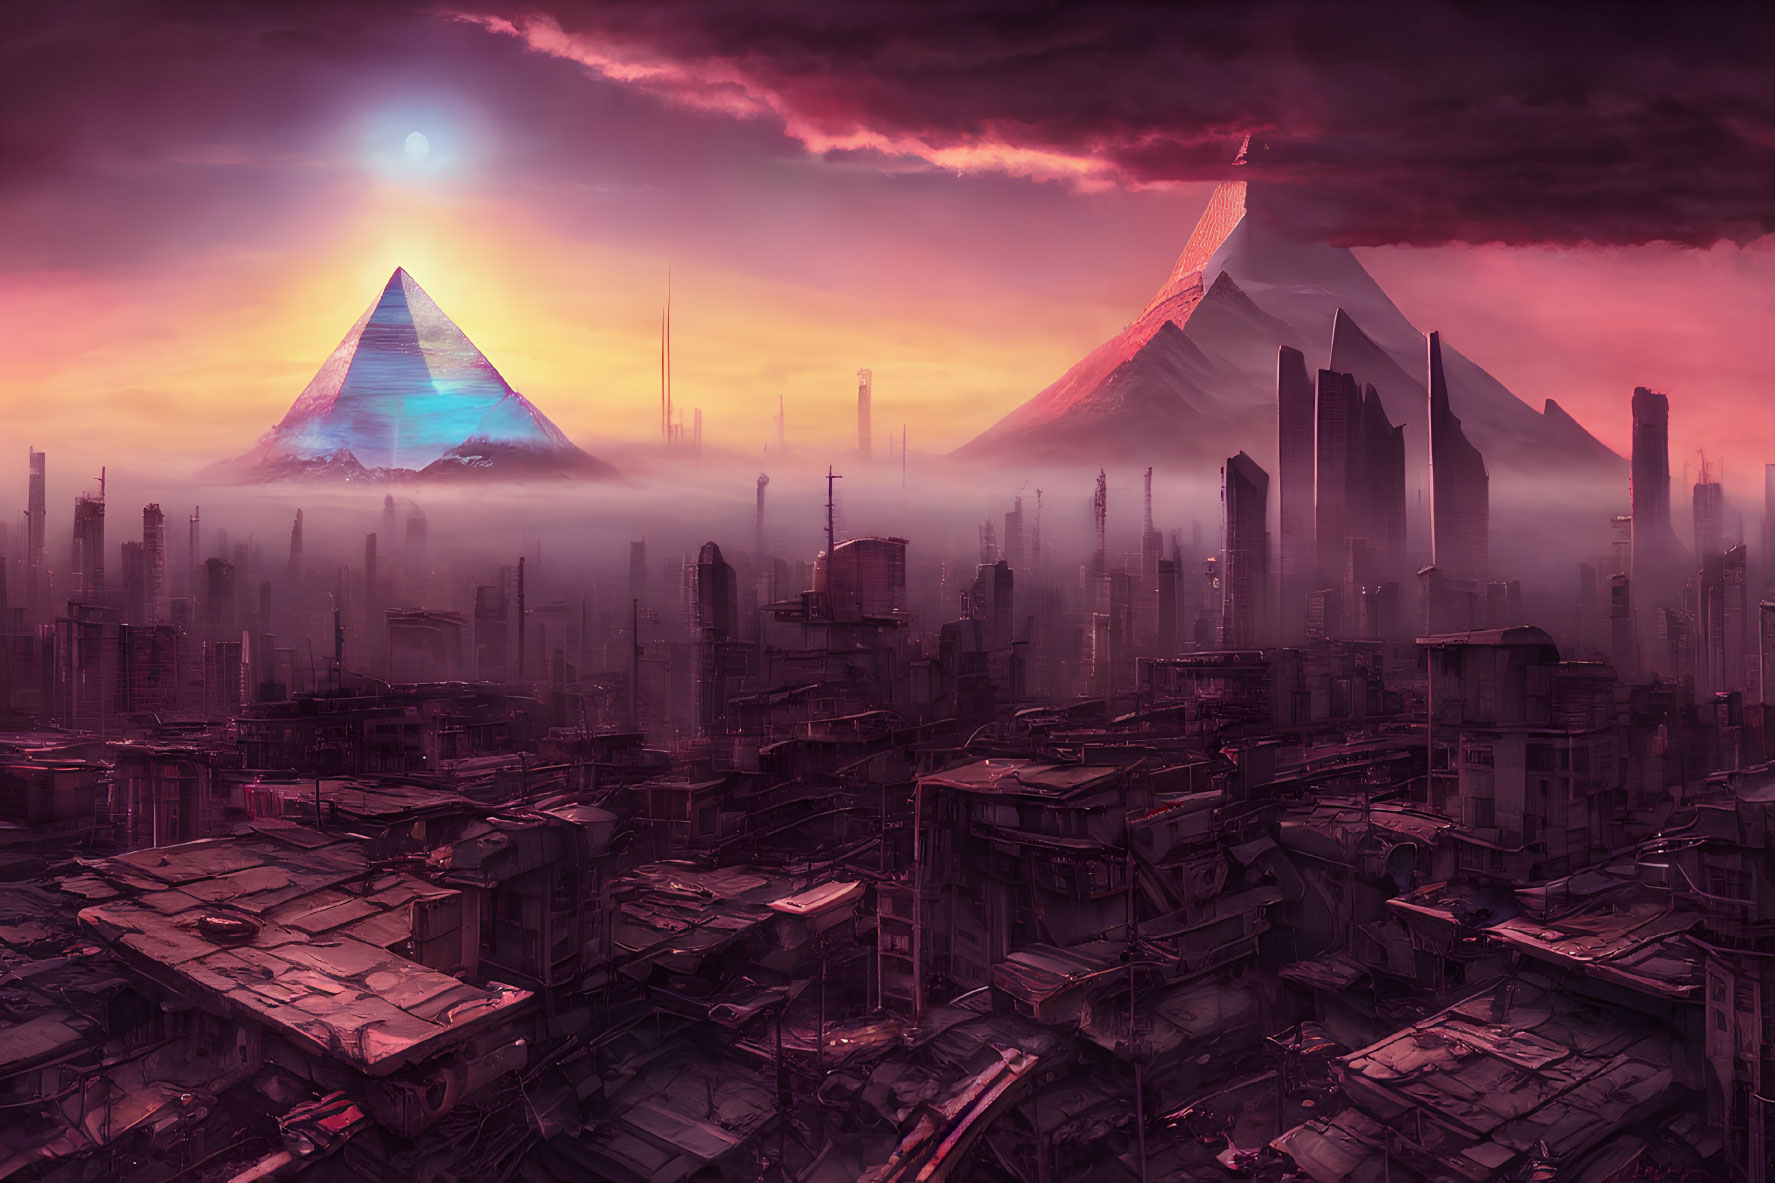 Dystopian cityscape at sunset with illuminated pyramids and skyscrapers